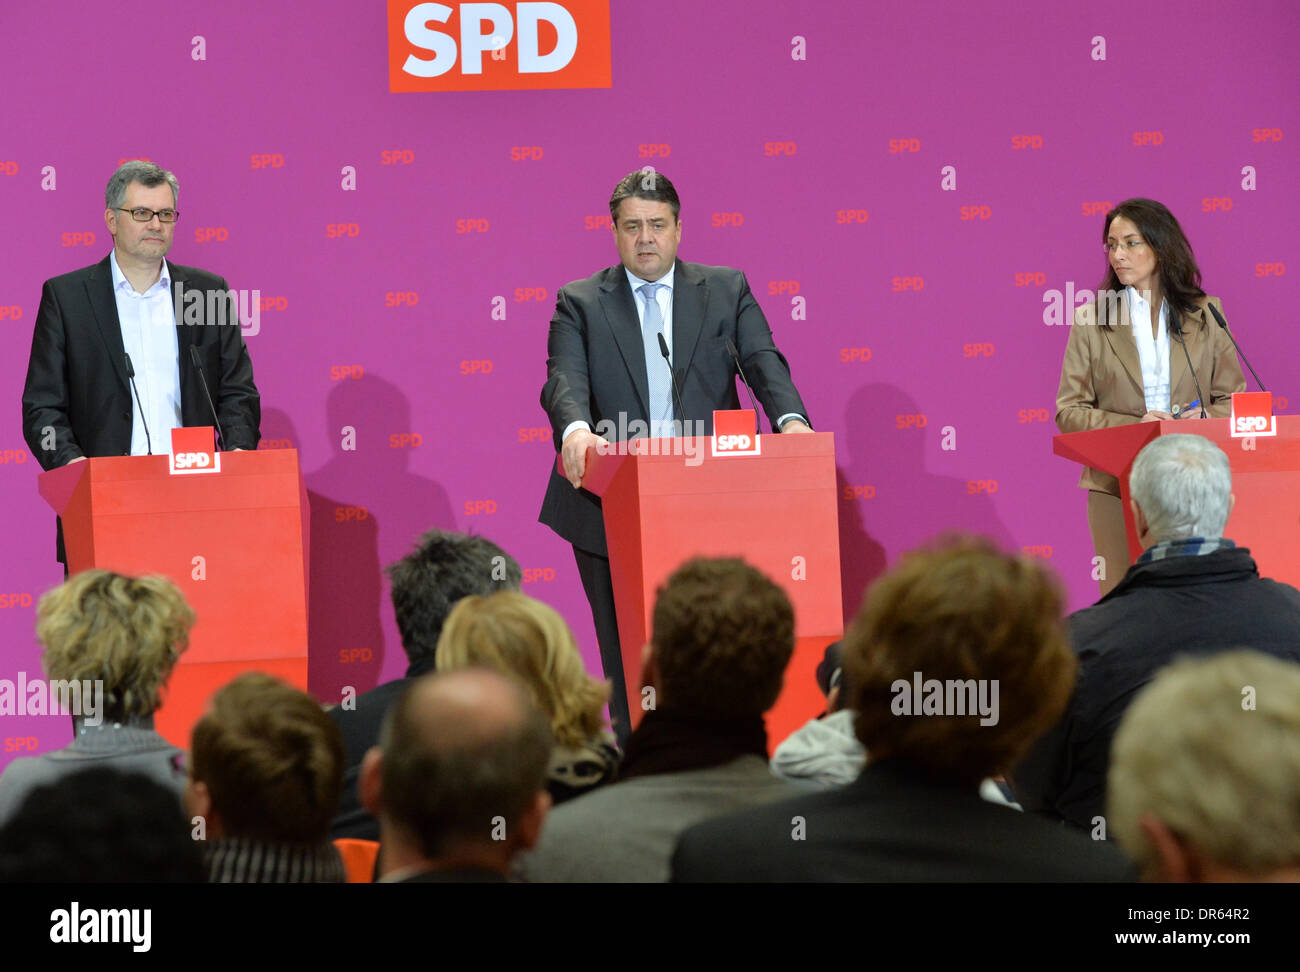 Berlin, Germany. 20th Jan, 2014. Chairman of the Social Democratic Party of Germany (SPD) Sigmar Gabriel (C) presents the designated secretary-general of the SPD, Yasmin Fahimi, and the designated treasurer of the SPD, Dietmar Nietan, during a press conference after the meeting of the party executive committee in Berlin, Germany, 20 January 2014. Fahimi and Nietan are supposed to be elected into office at a special party conference next Sunday. Photo: MARC TIRL/dpa/Alamy Live News Stock Photo